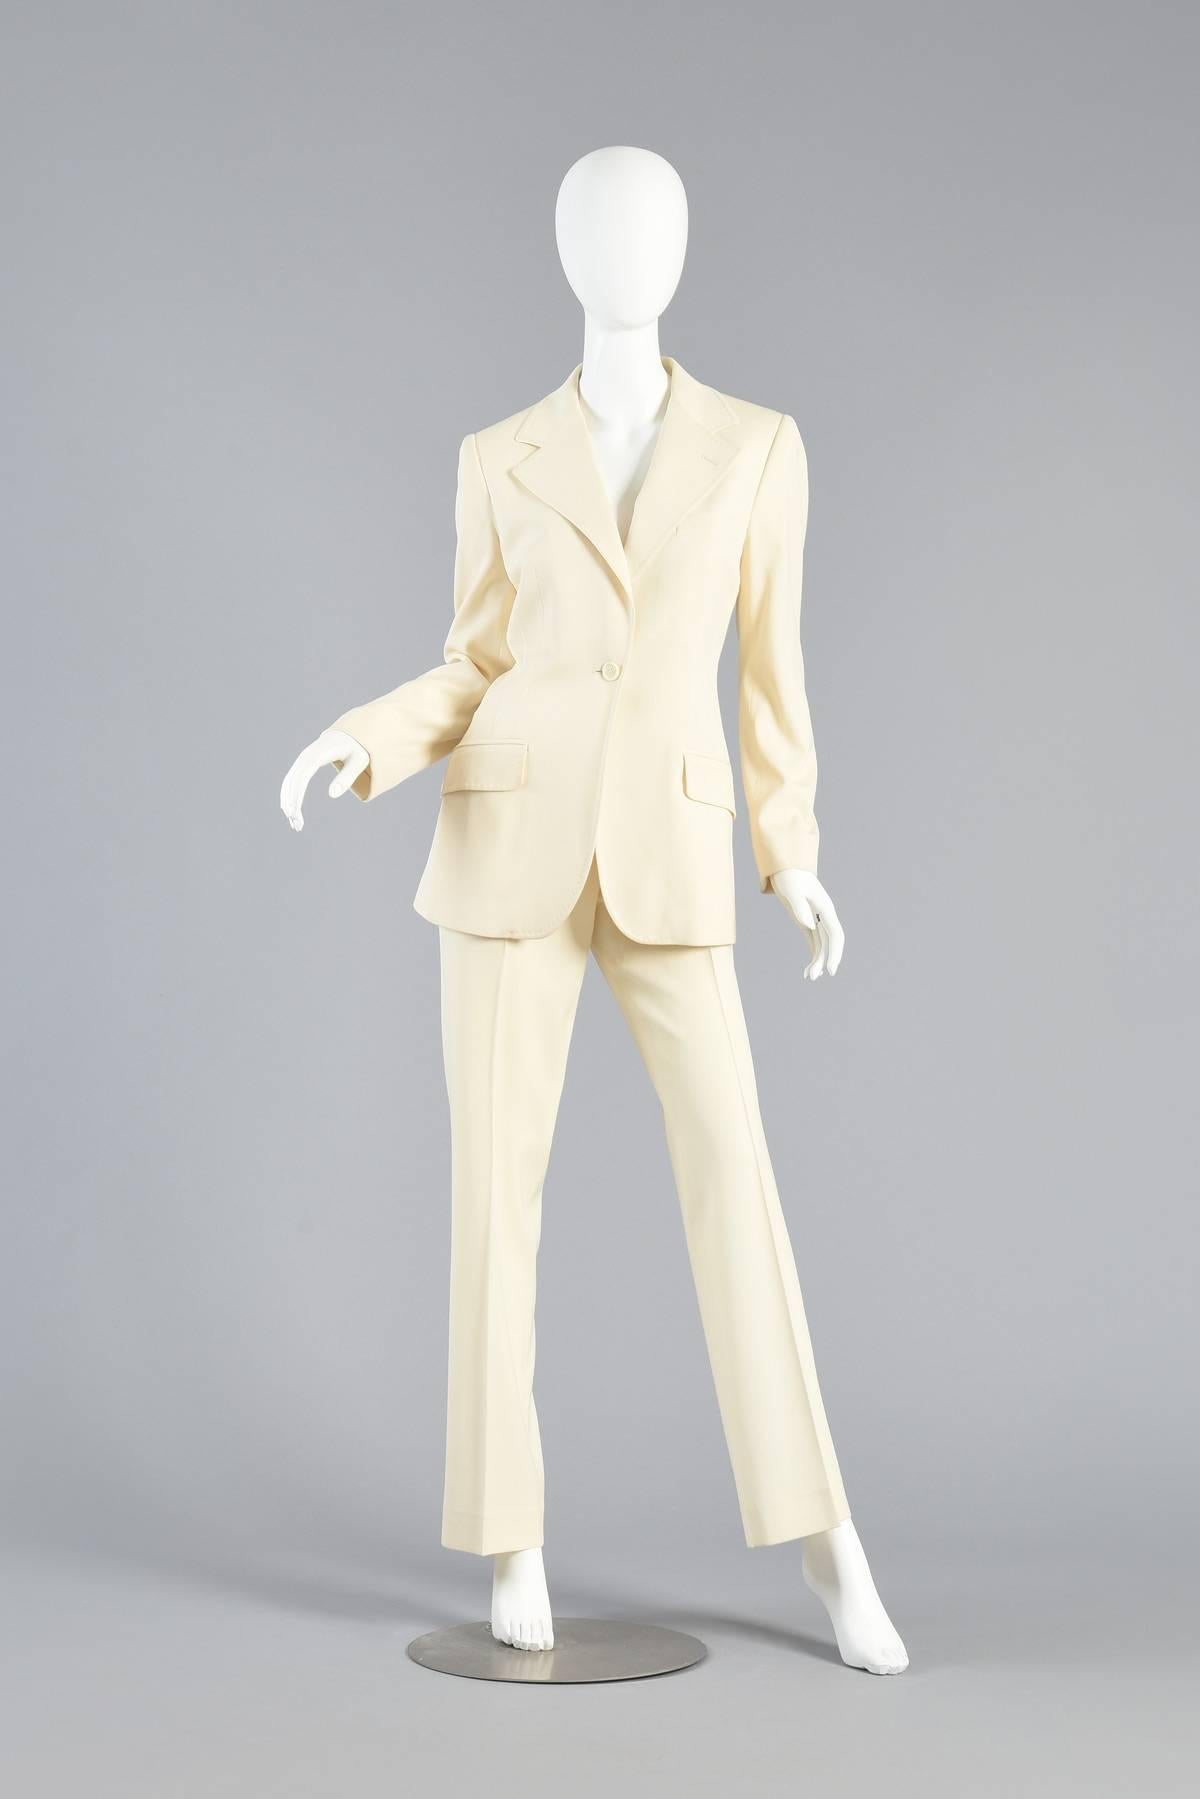 Simple, chic and so utterly classic. Vintage 1990s Dolce & Gabbana ivory suit. Classically tailored trousers and dinner jacket with oversized lapels. Subtle top stitched detailing. Excellent vintage condition. Best fits sizes L but please see